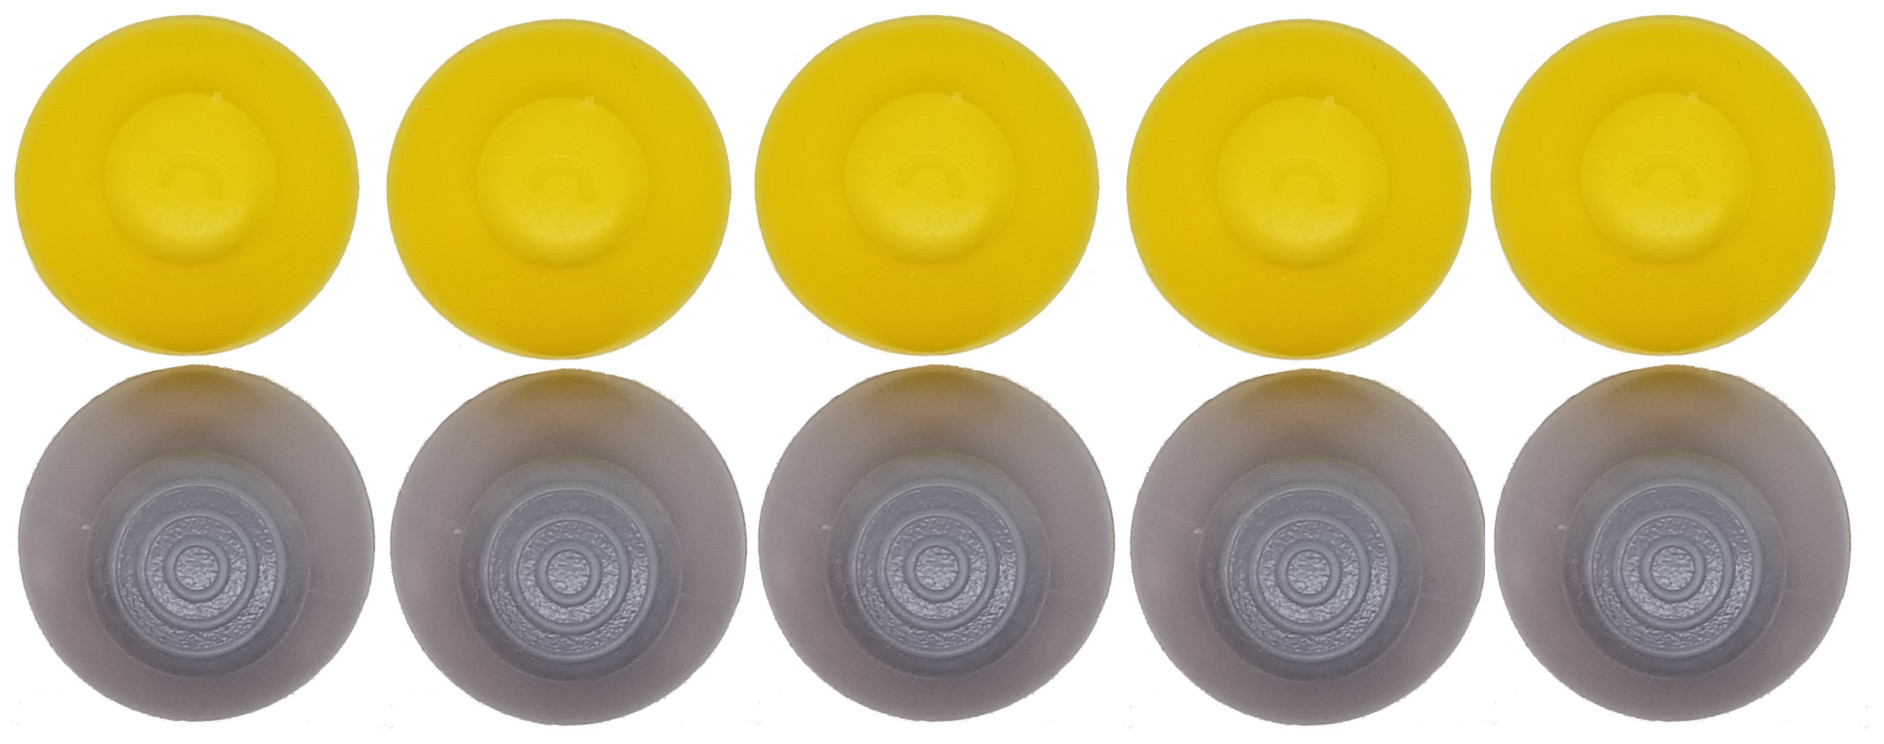 Games&Tech 10 Joystick Analog Stick Caps Covers 5 Left (Grey) and 5 Right (Yellow) Replacement Parts for Nintendo GameCube Controller - image 1 of 1